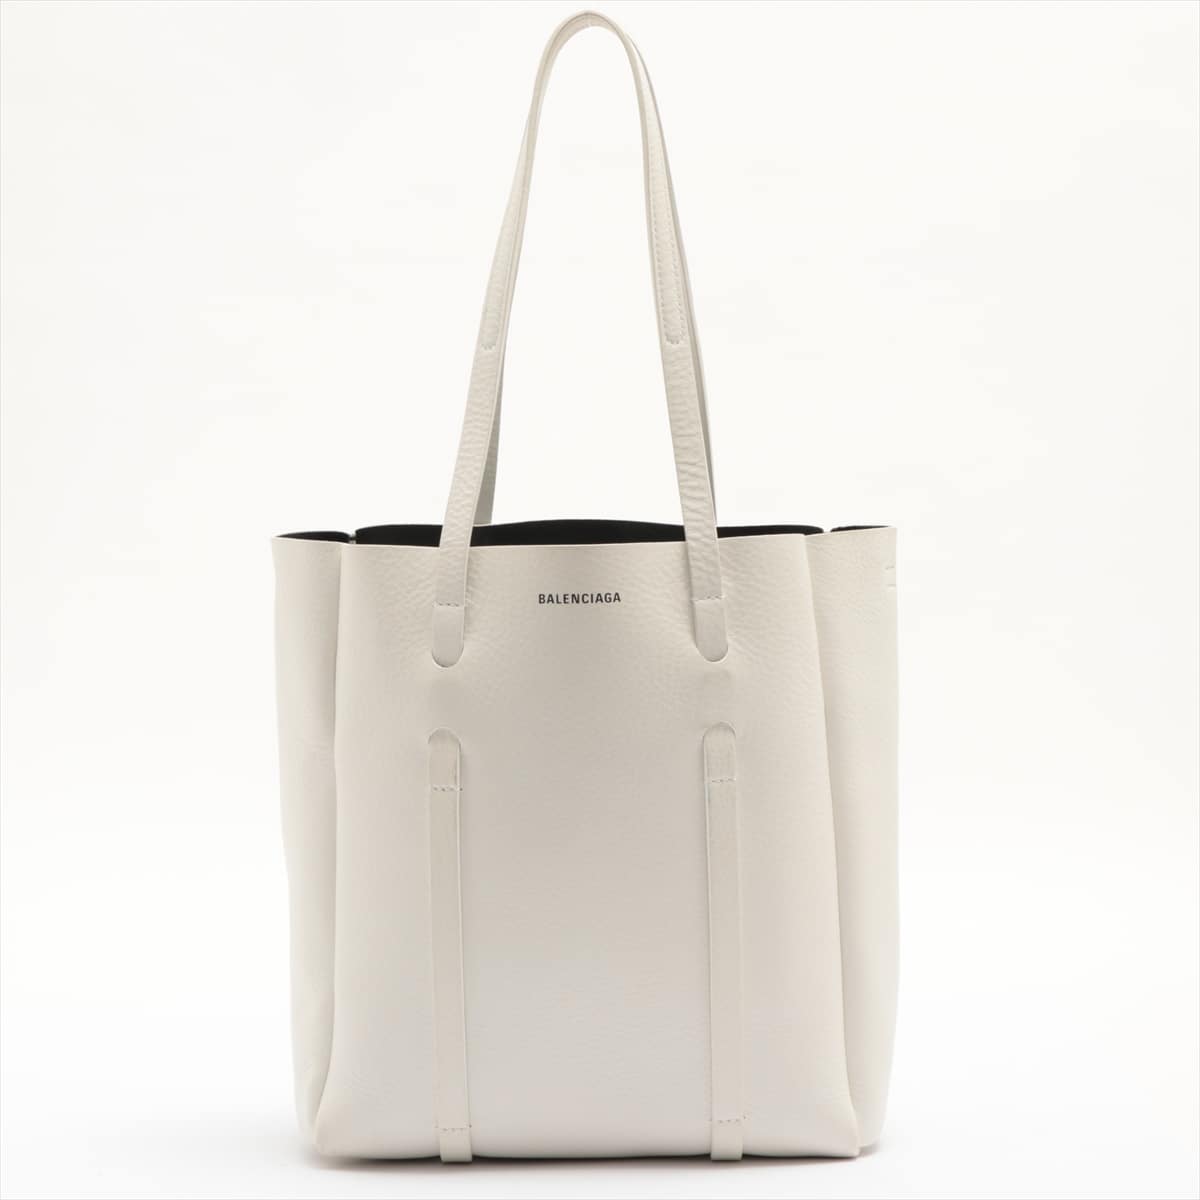 Balenciaga Everyday Tote XS Leather 2 way tote bag White 489813 Pouch With mirror